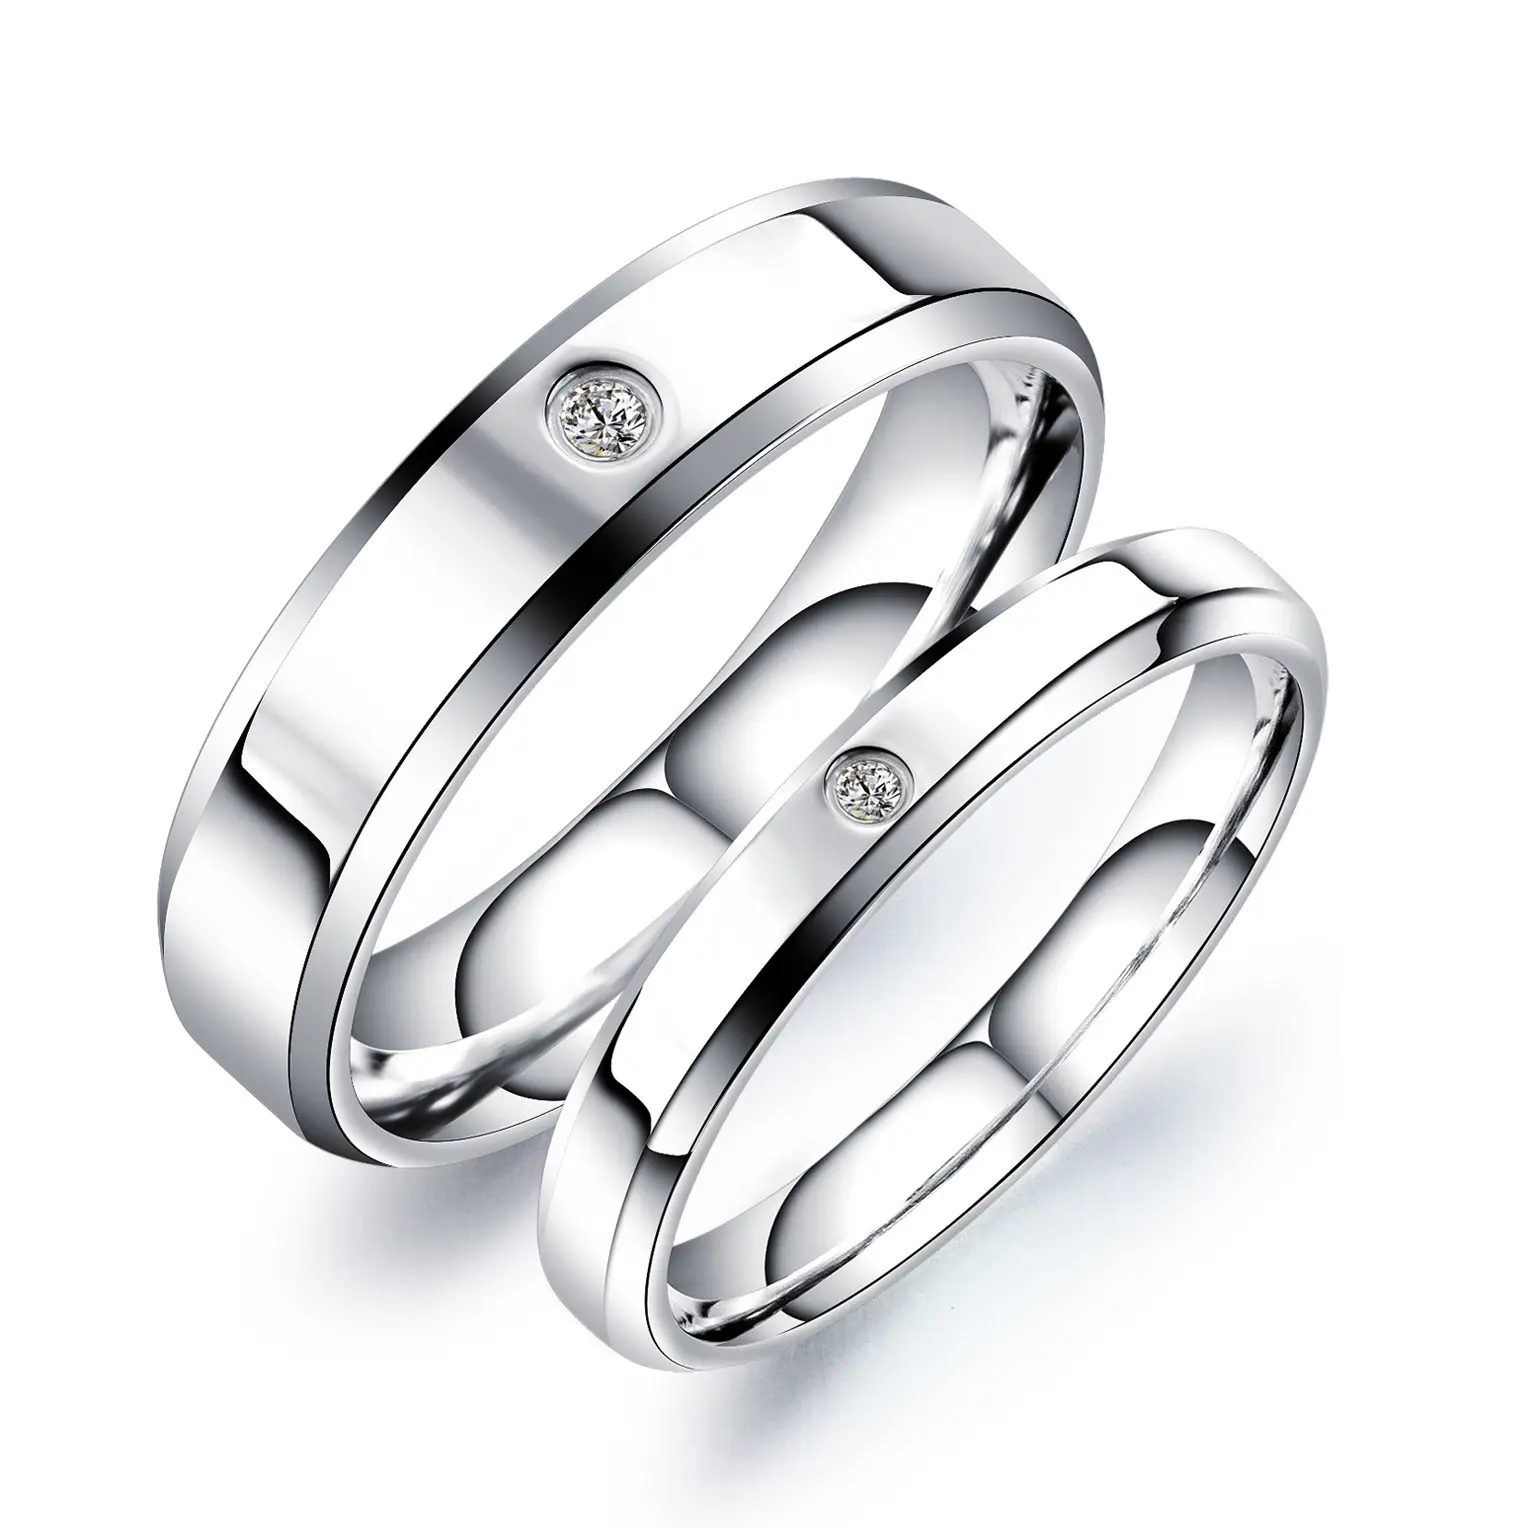 New Arrival Titanium Steel Stainless Steel Couple Rings Jewelry Simple Smooth Surface Engagement Ring Set